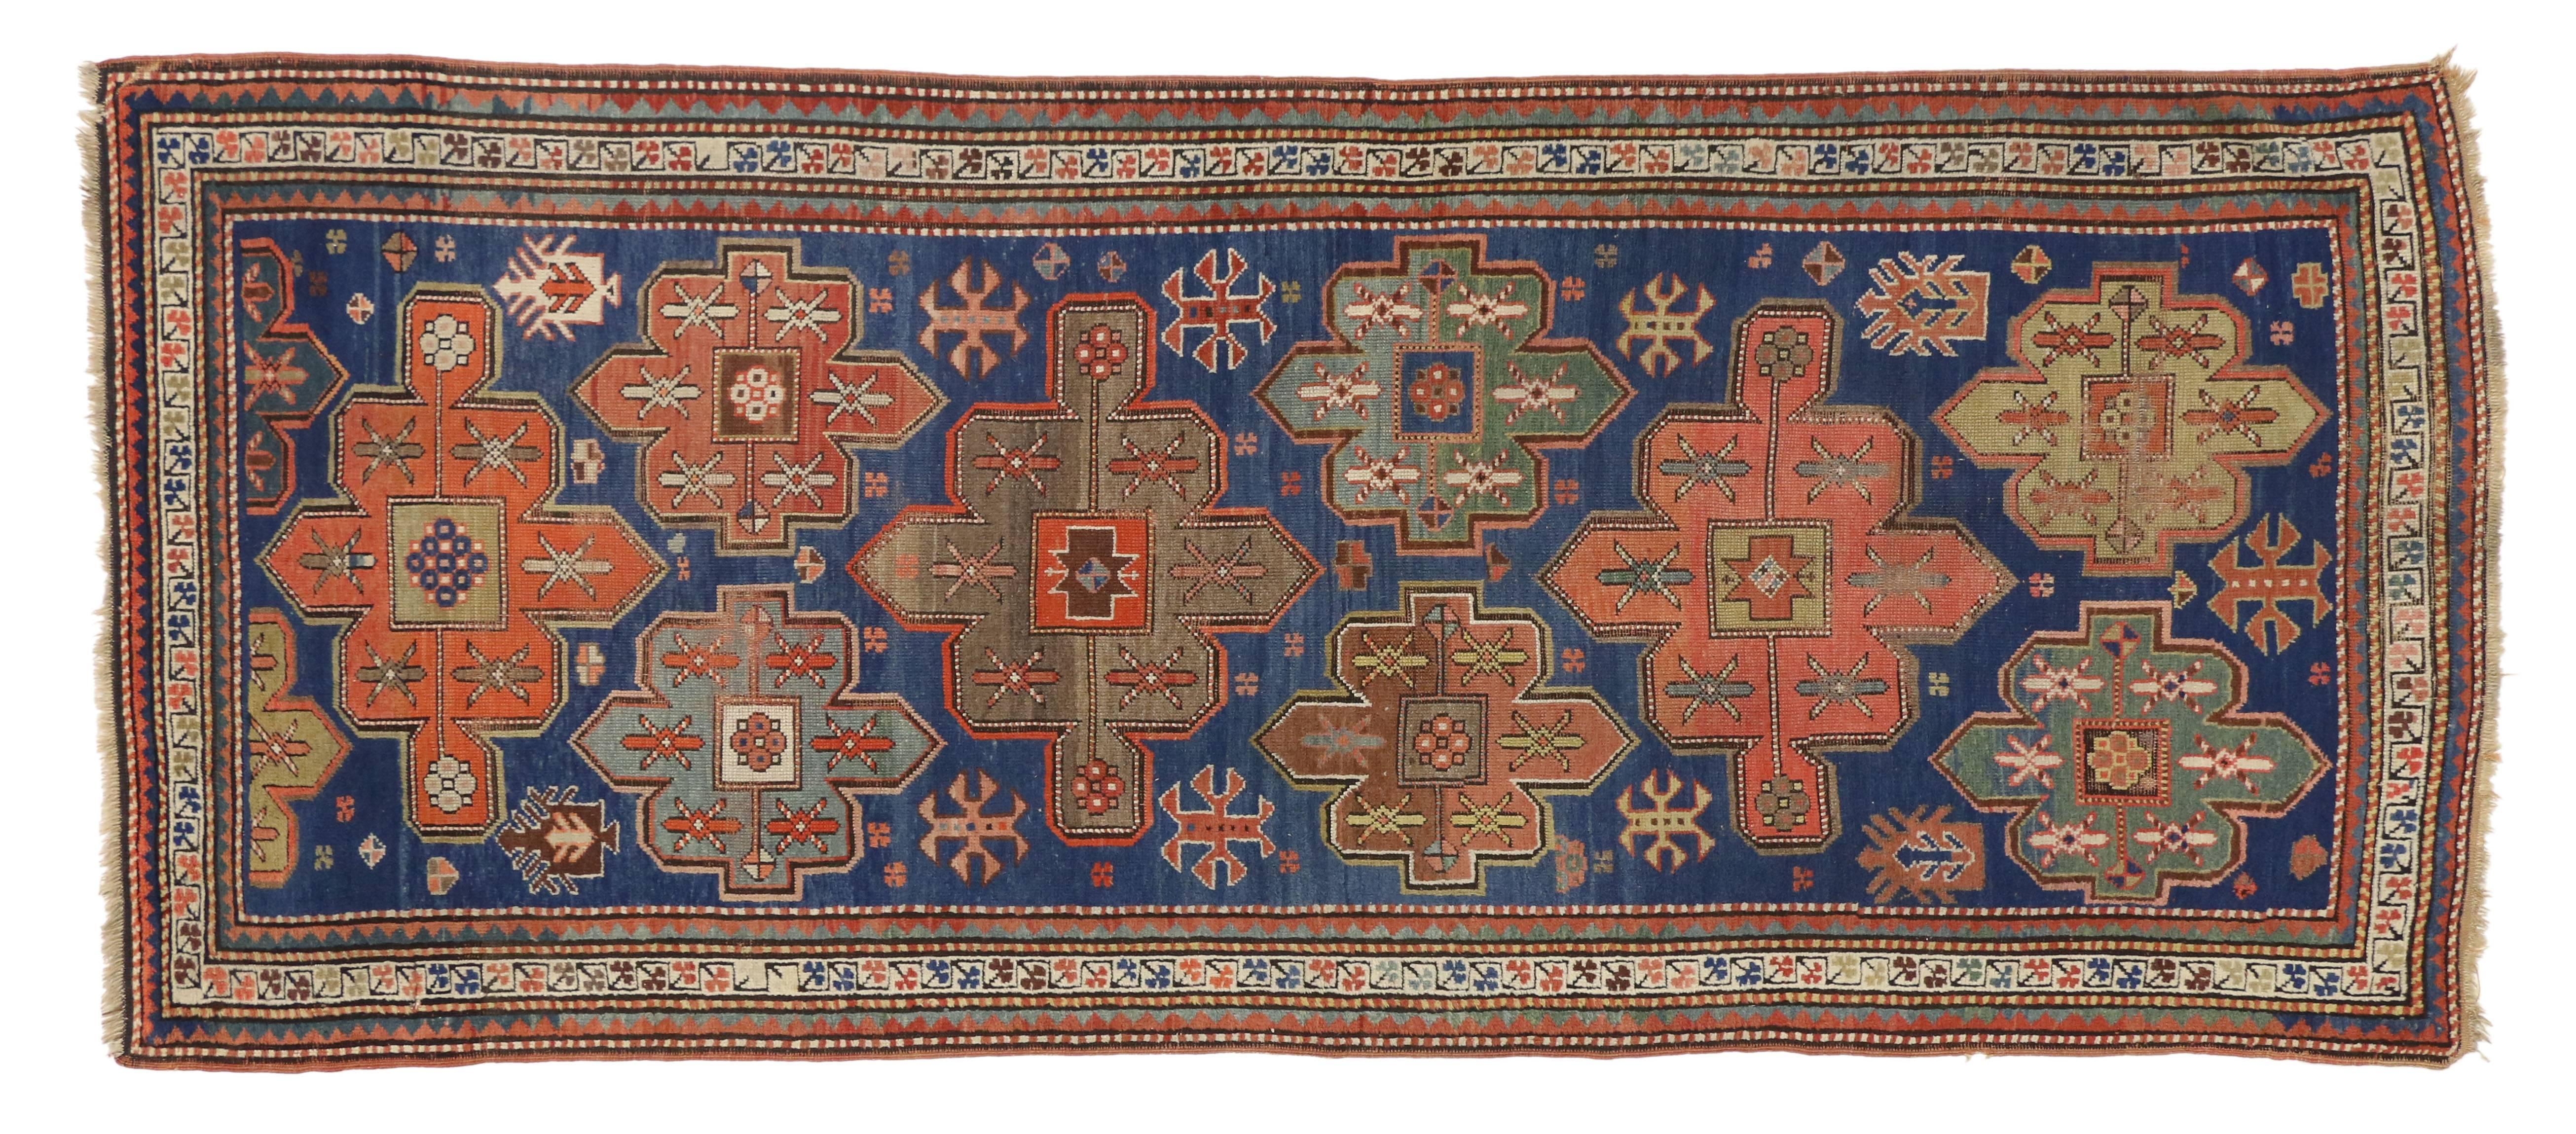 Rustic Tribal Style Antique Caucasian Kazak Rug, Wide Hallway Runner In Good Condition For Sale In Dallas, TX